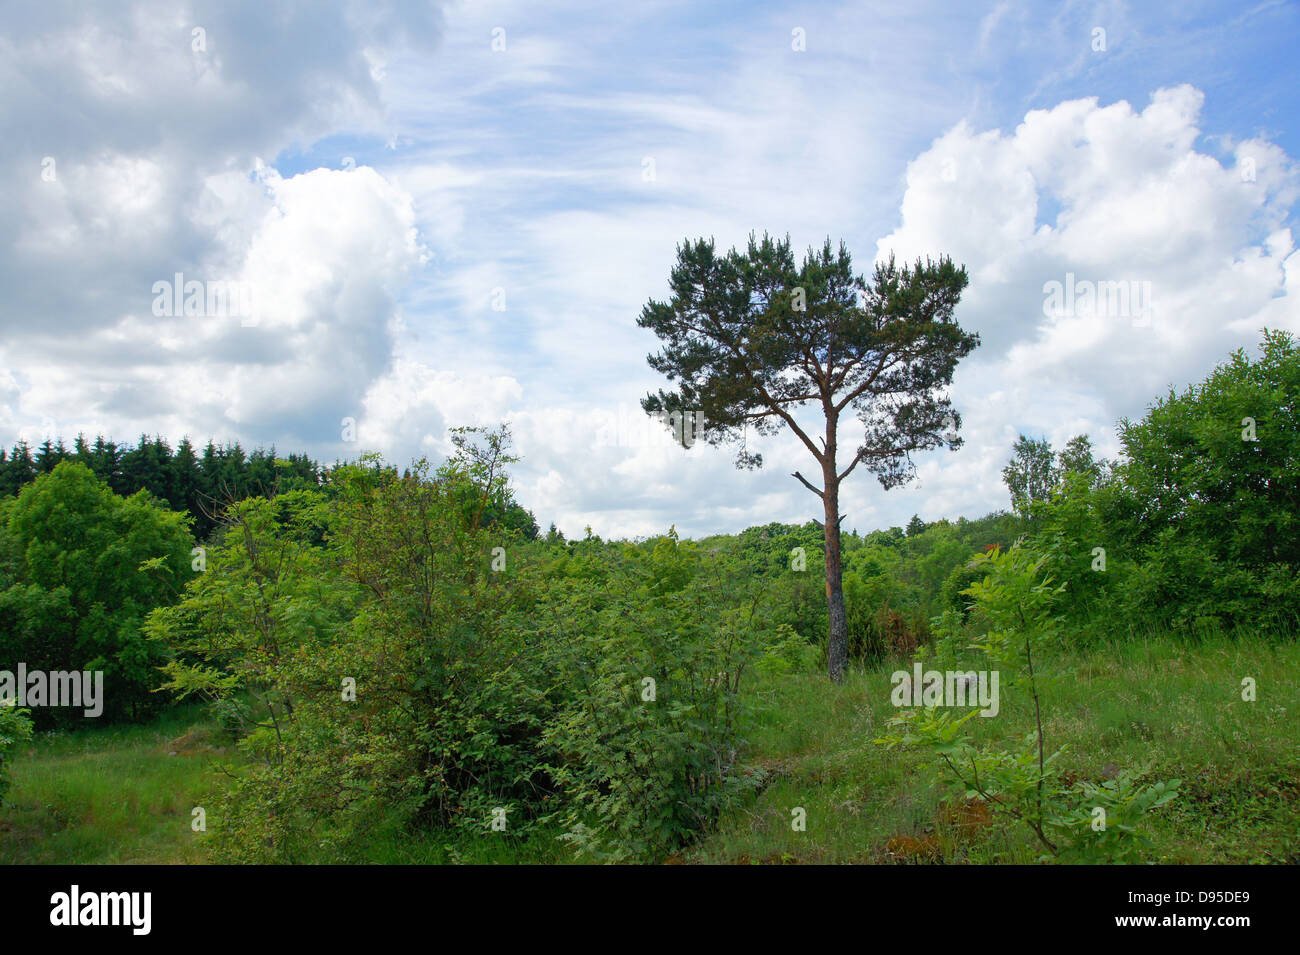 Landscape with the cloudy sky and plants Stock Photo